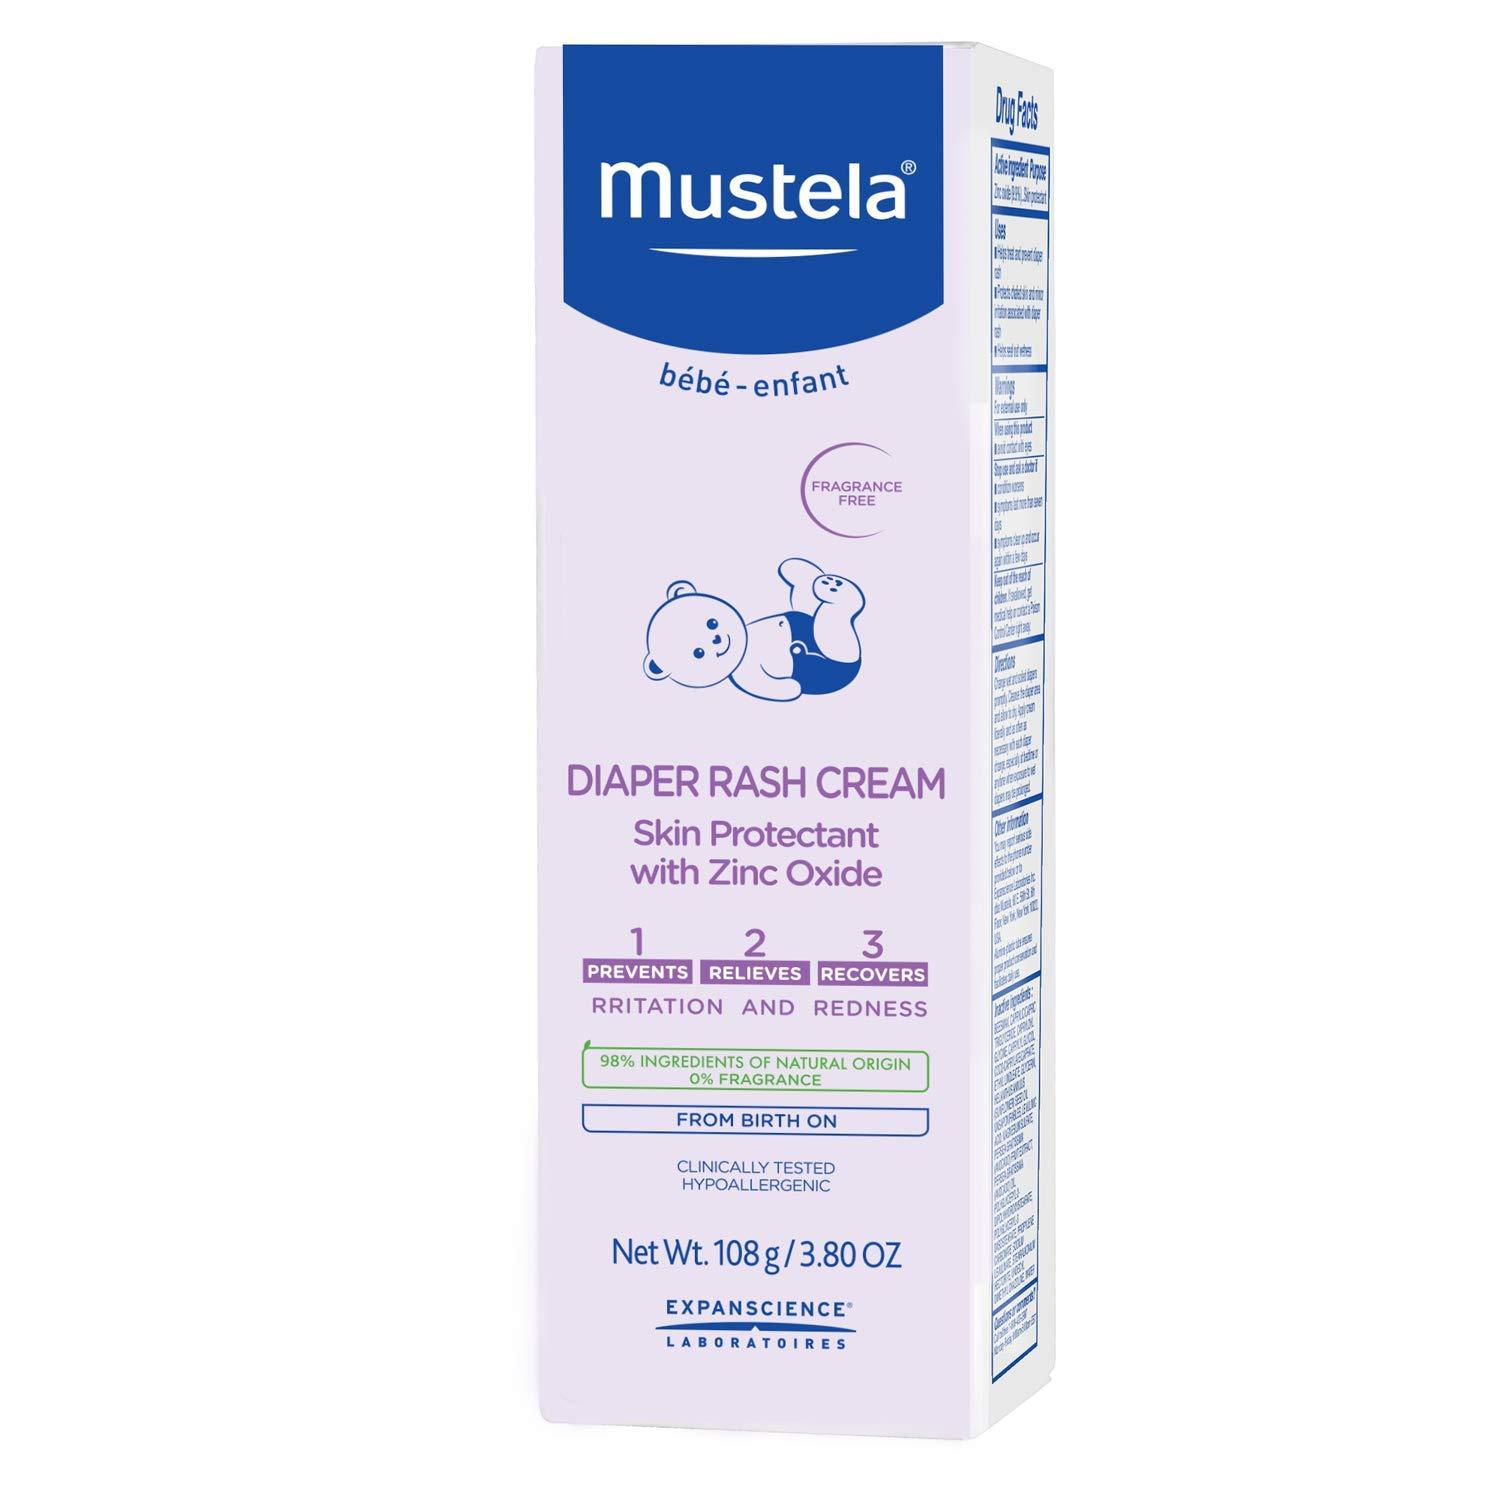 Diaper Changes Made Easy  Mustela Liniment Review 